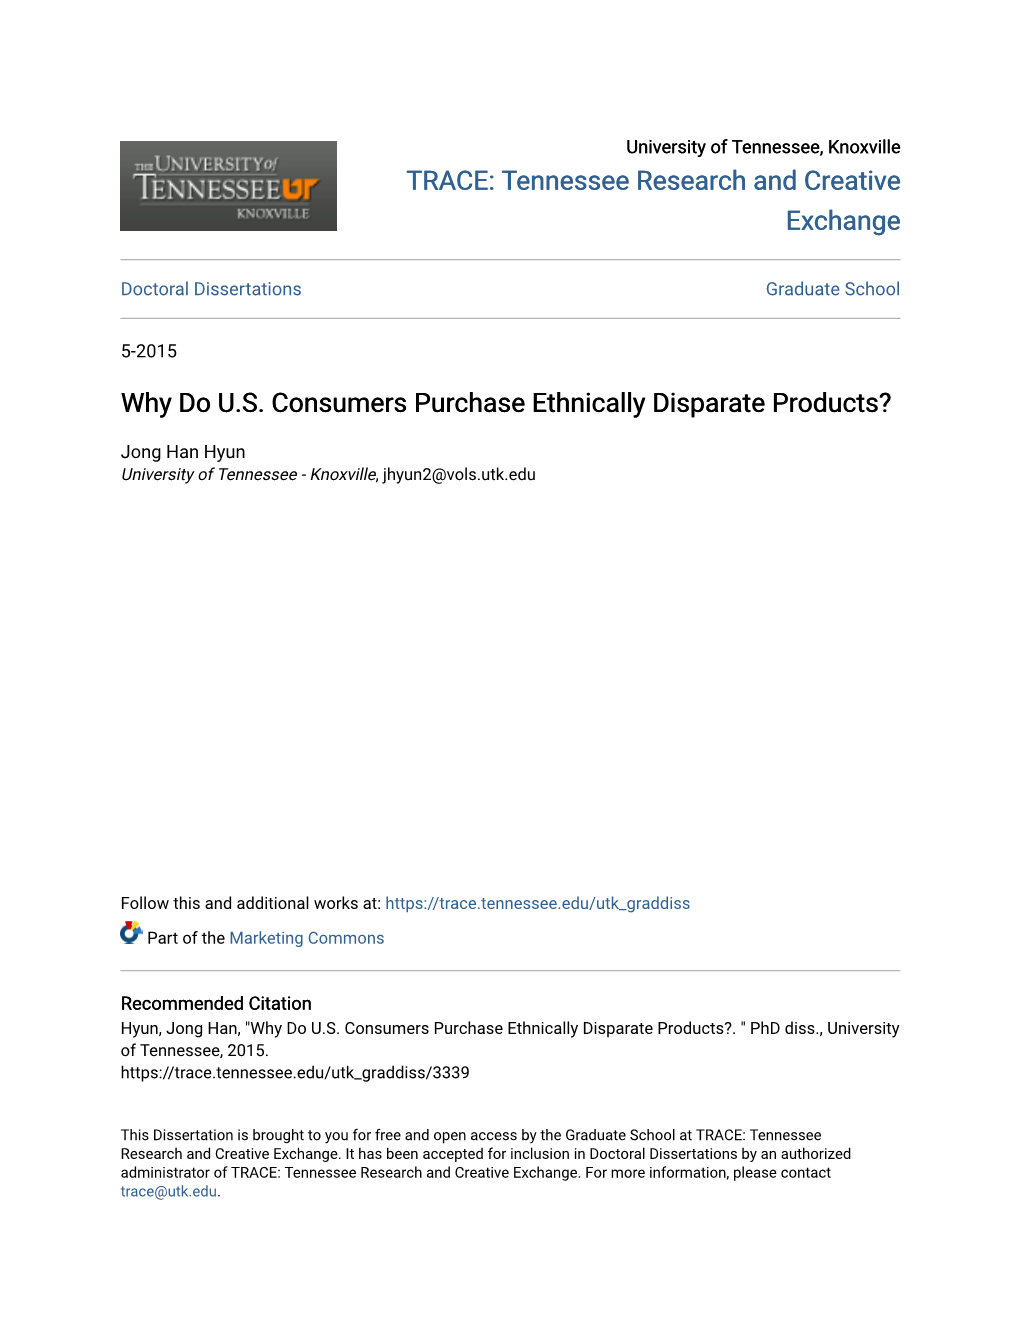 Why Do U.S. Consumers Purchase Ethnically Disparate Products?